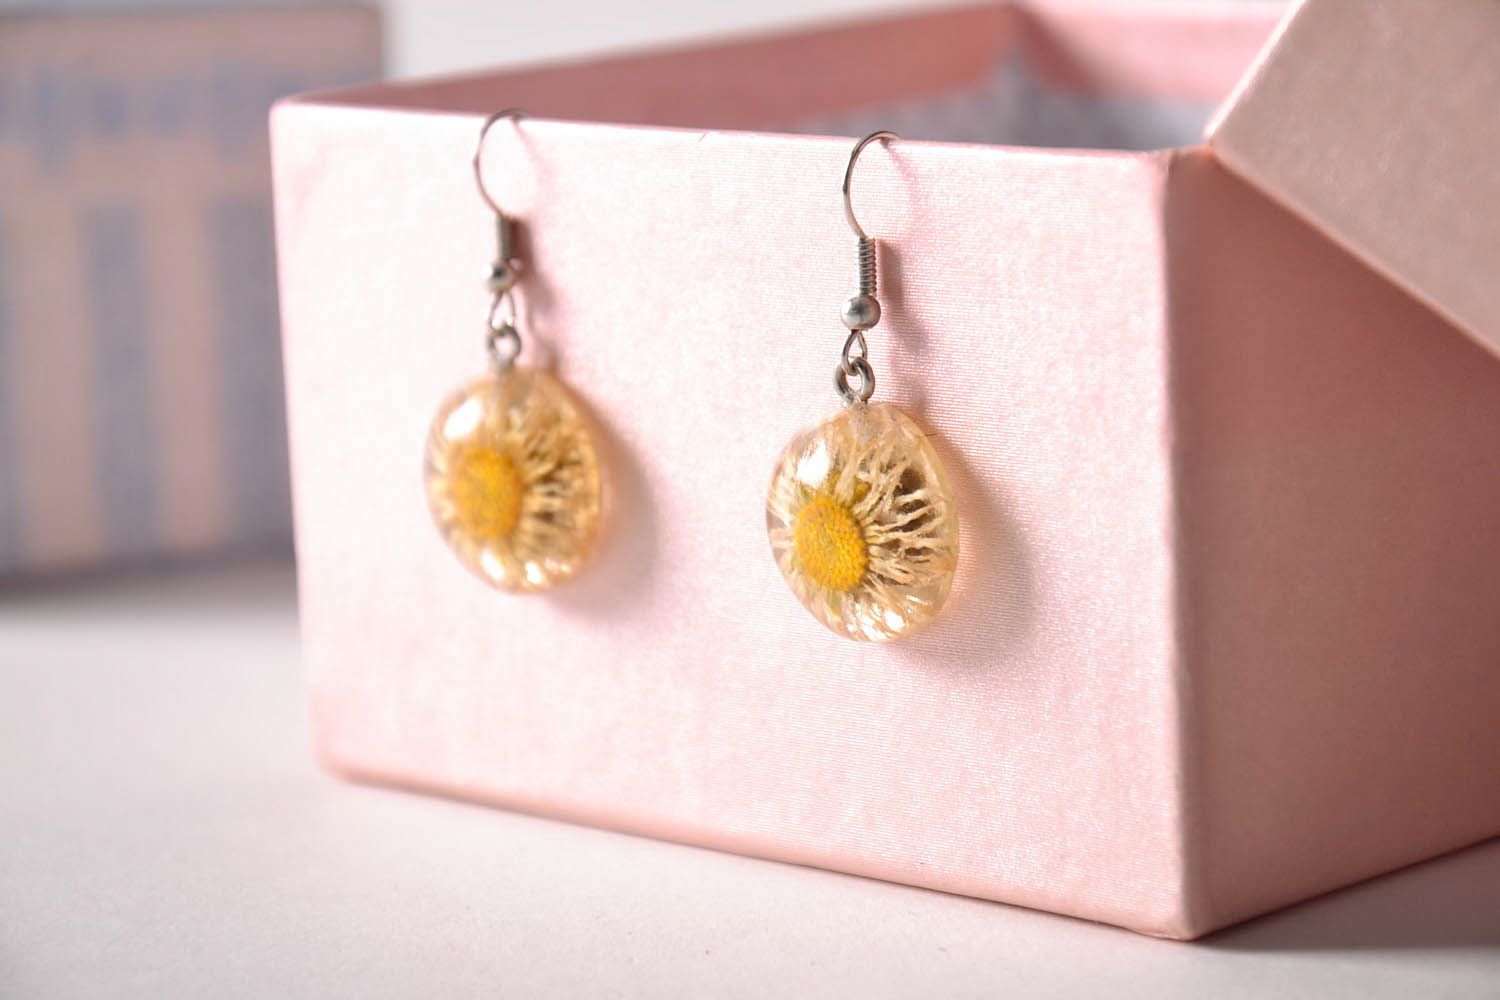 Earrings made of camomiles photo 2